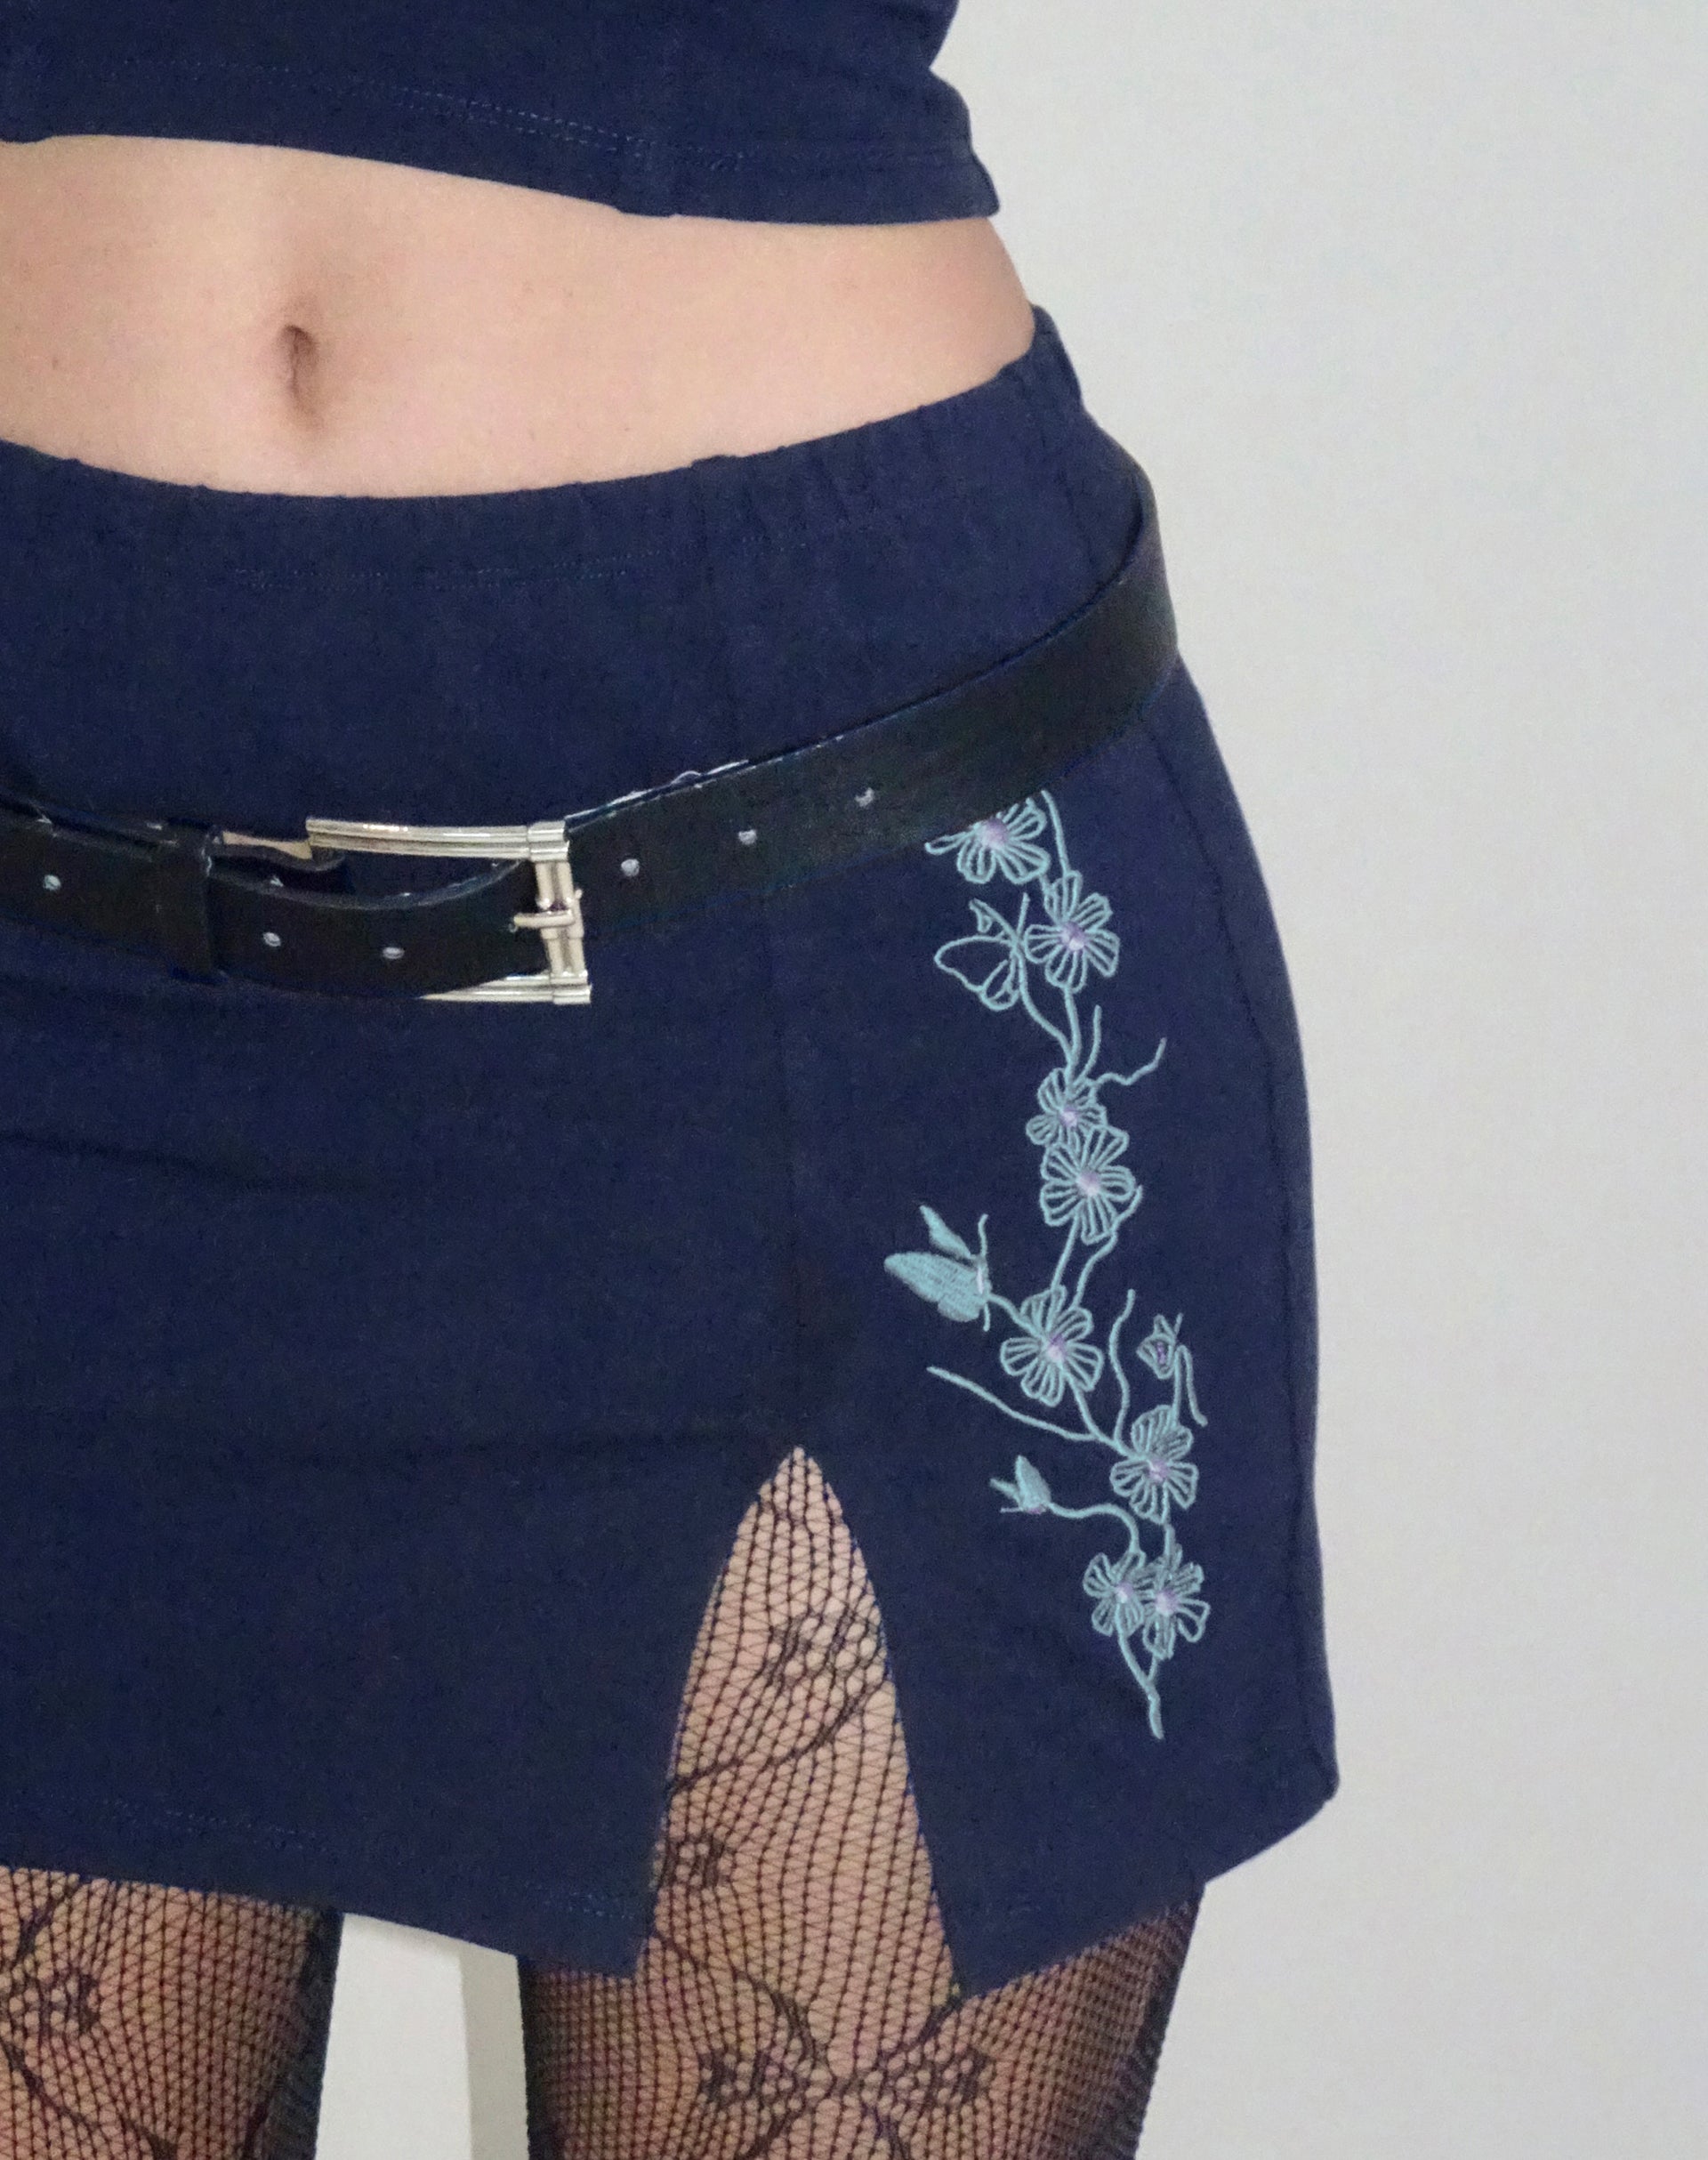 – Navy Butterfly Emb Embroidered | Flower Lael Skirt Mini in